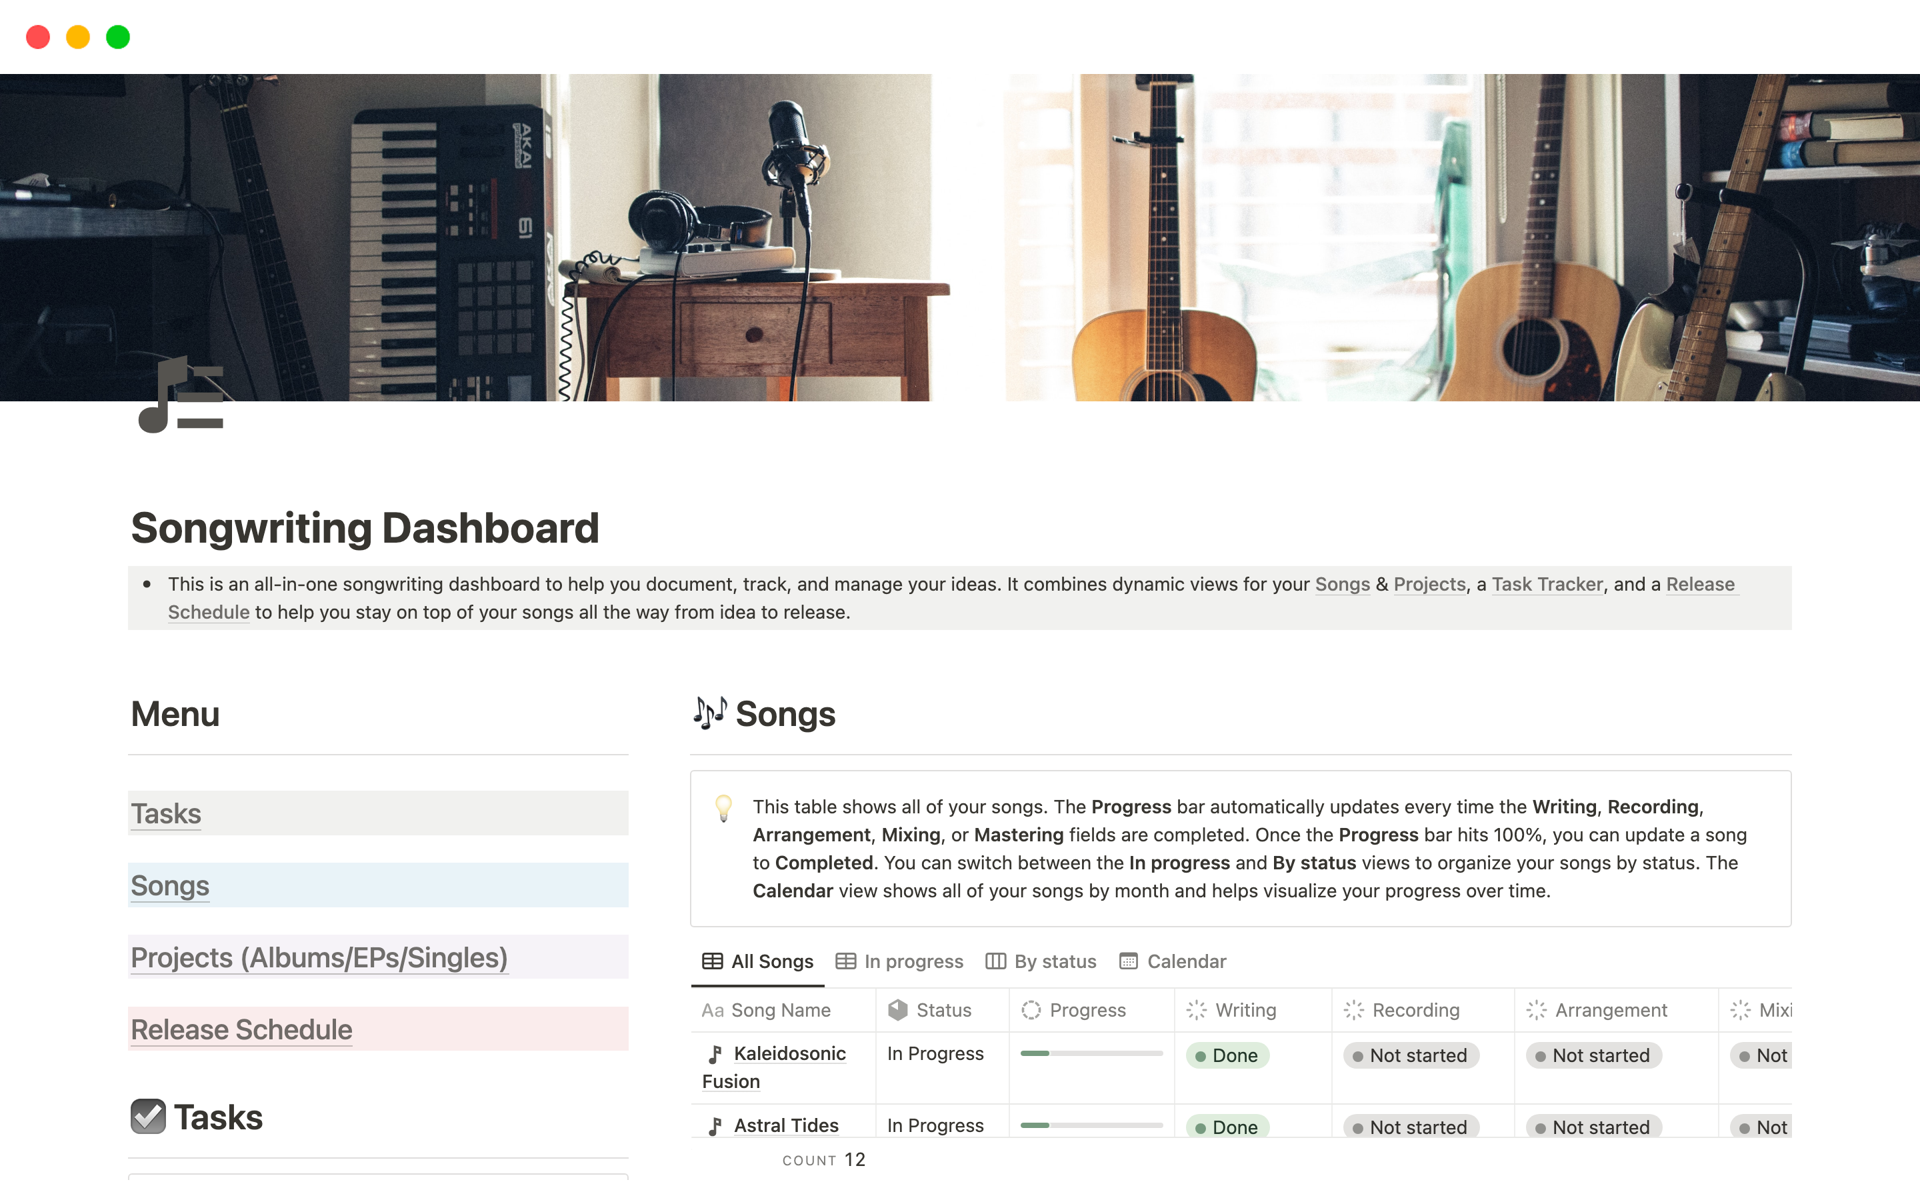 All-in-one songwriting dashboard to help you document, track, and manage your ideas.